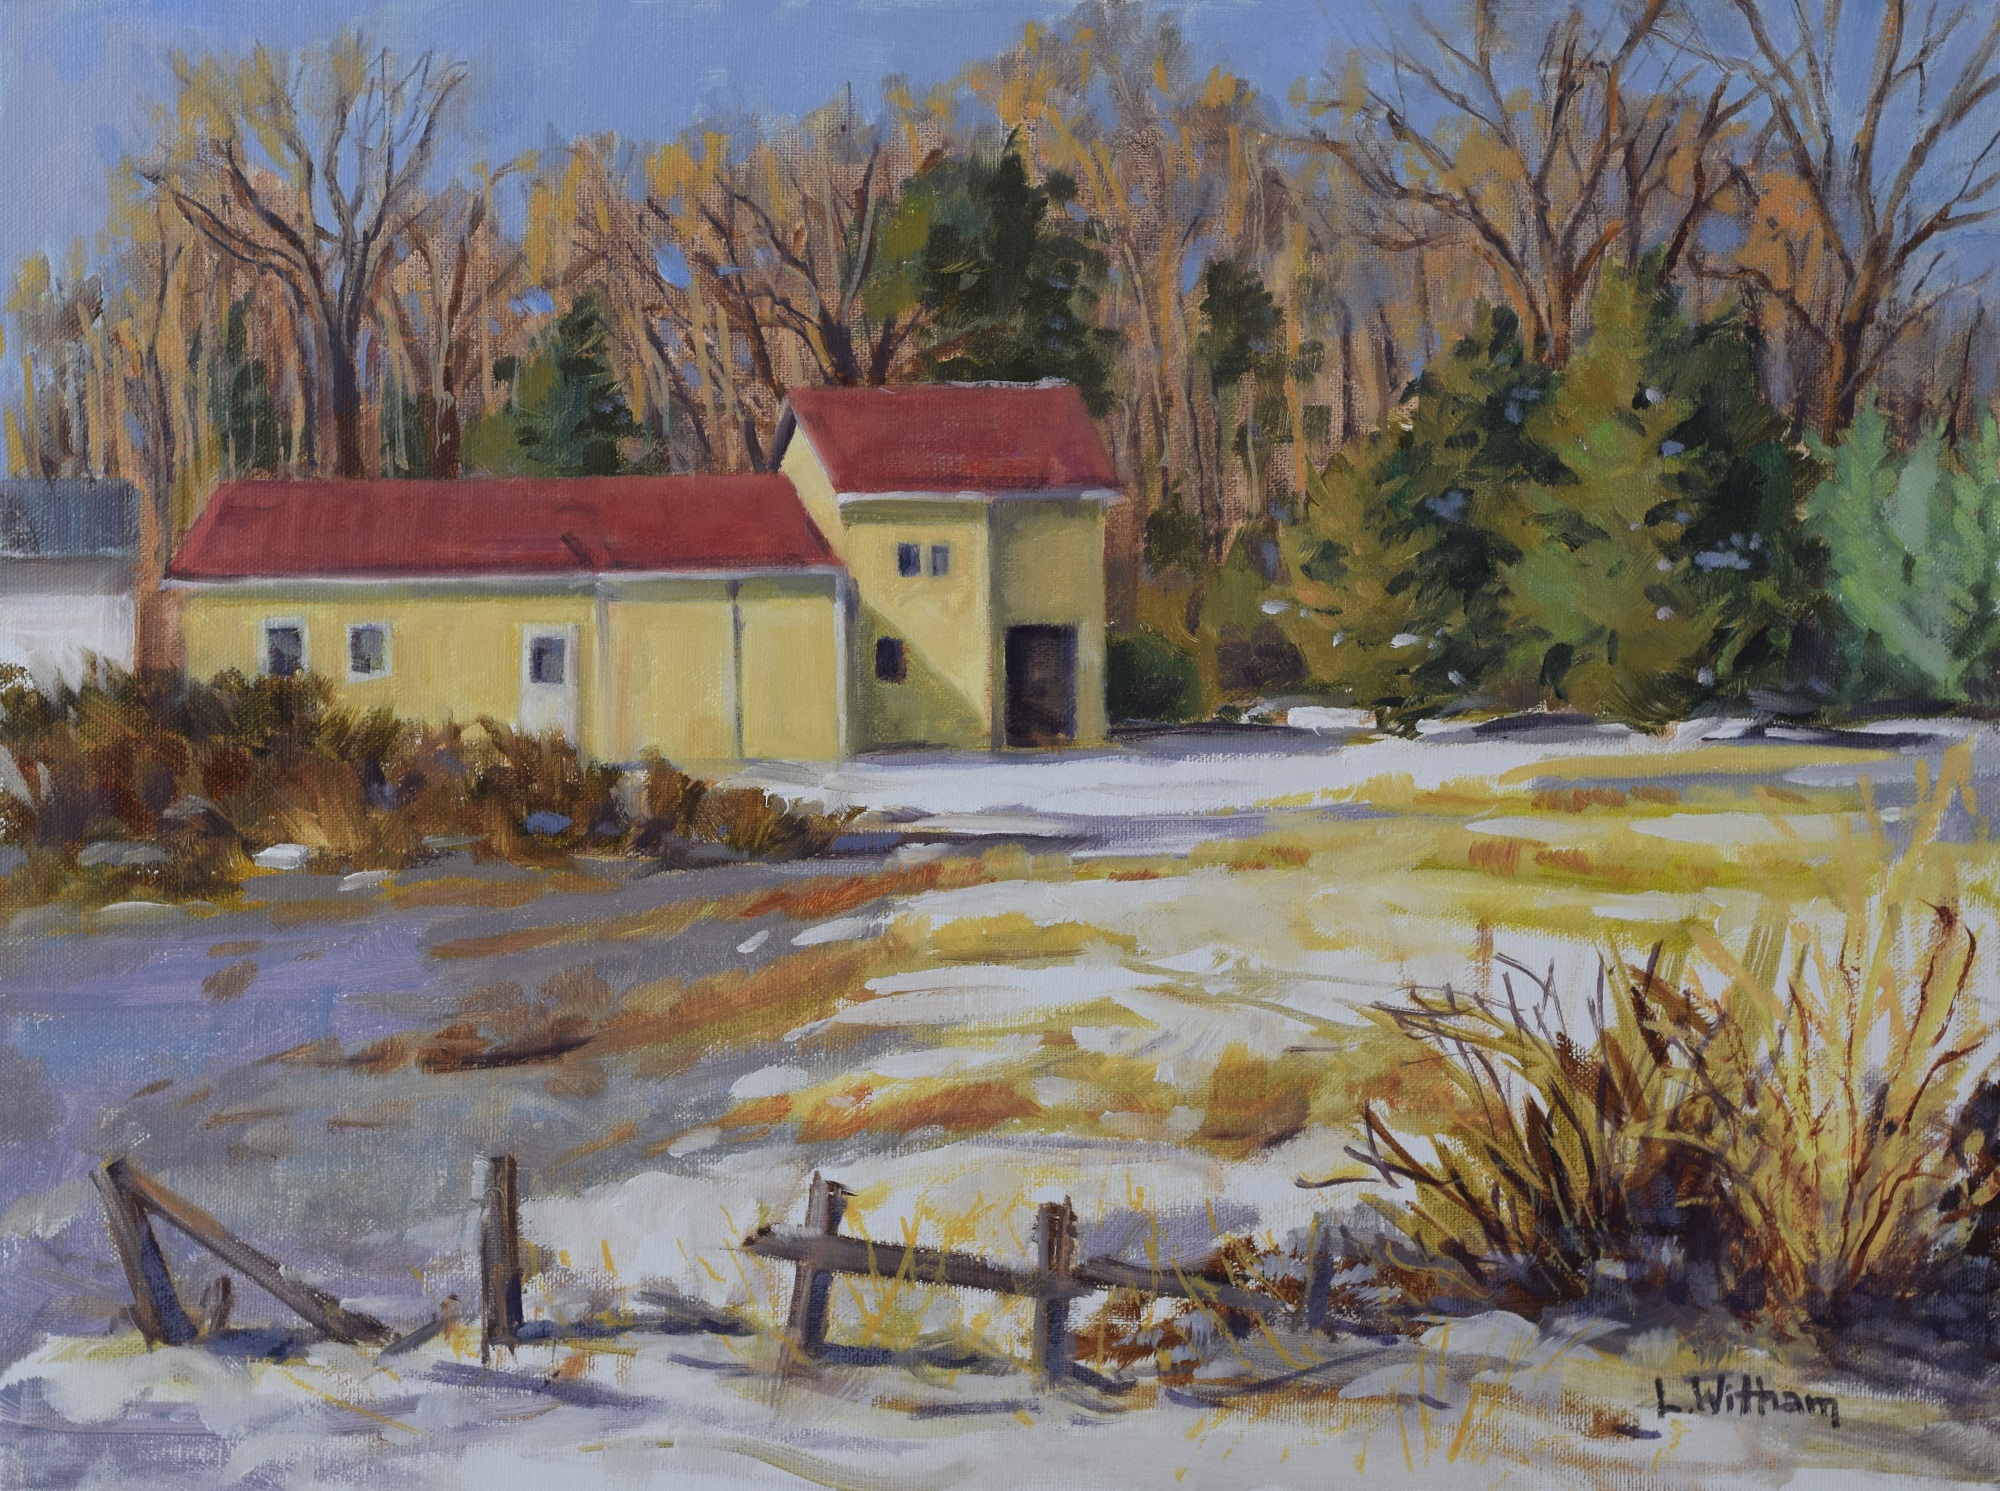 First Snow, Oil on canvas, 12x16